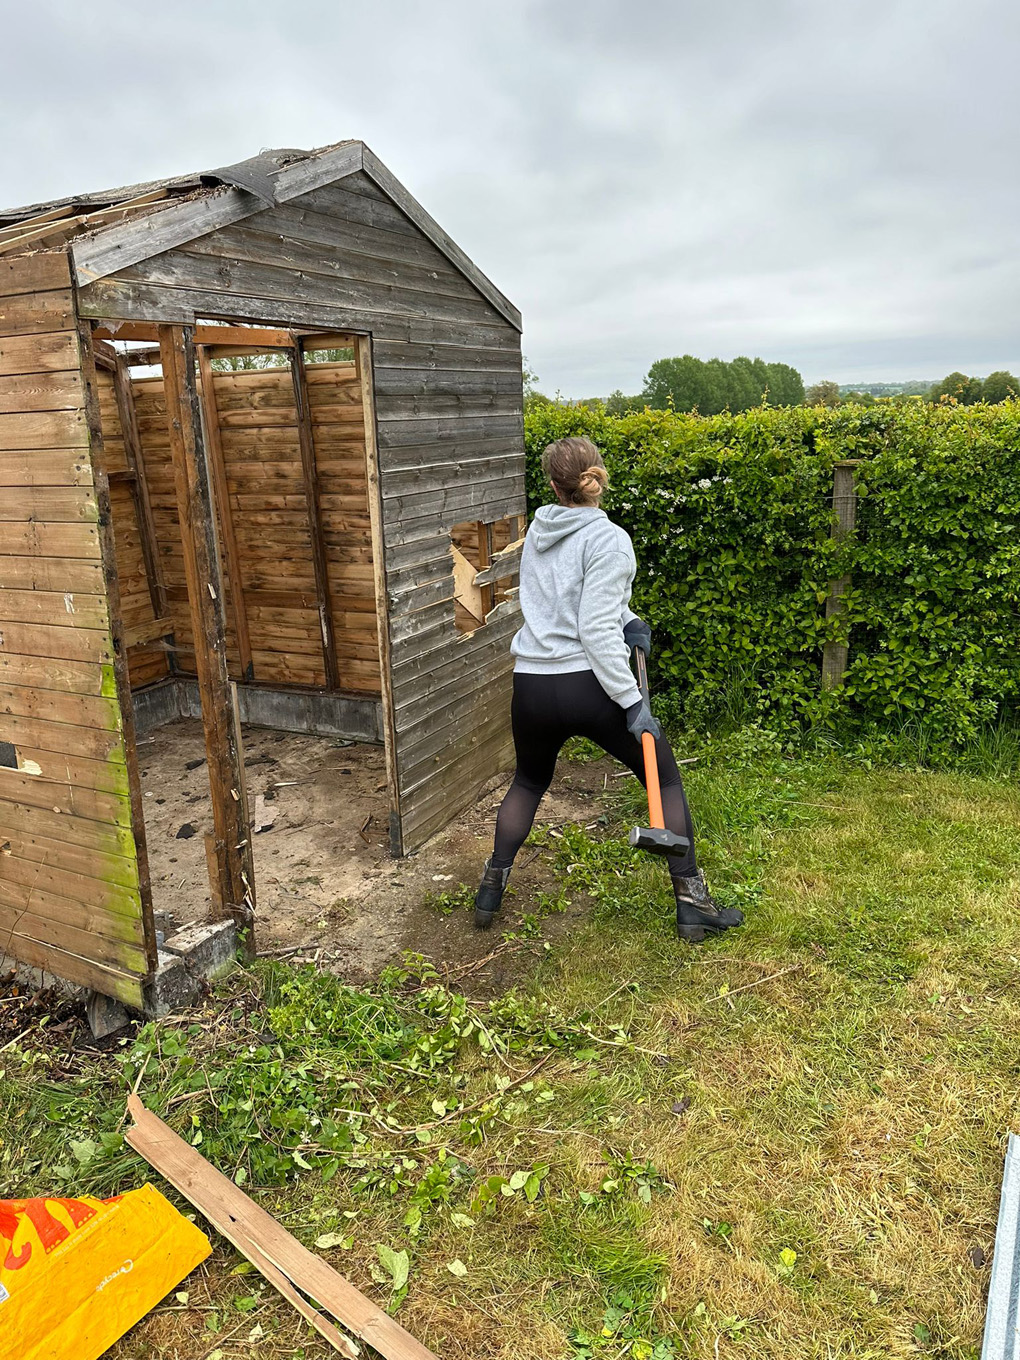 Lady with sledgehammer destroying a shed.